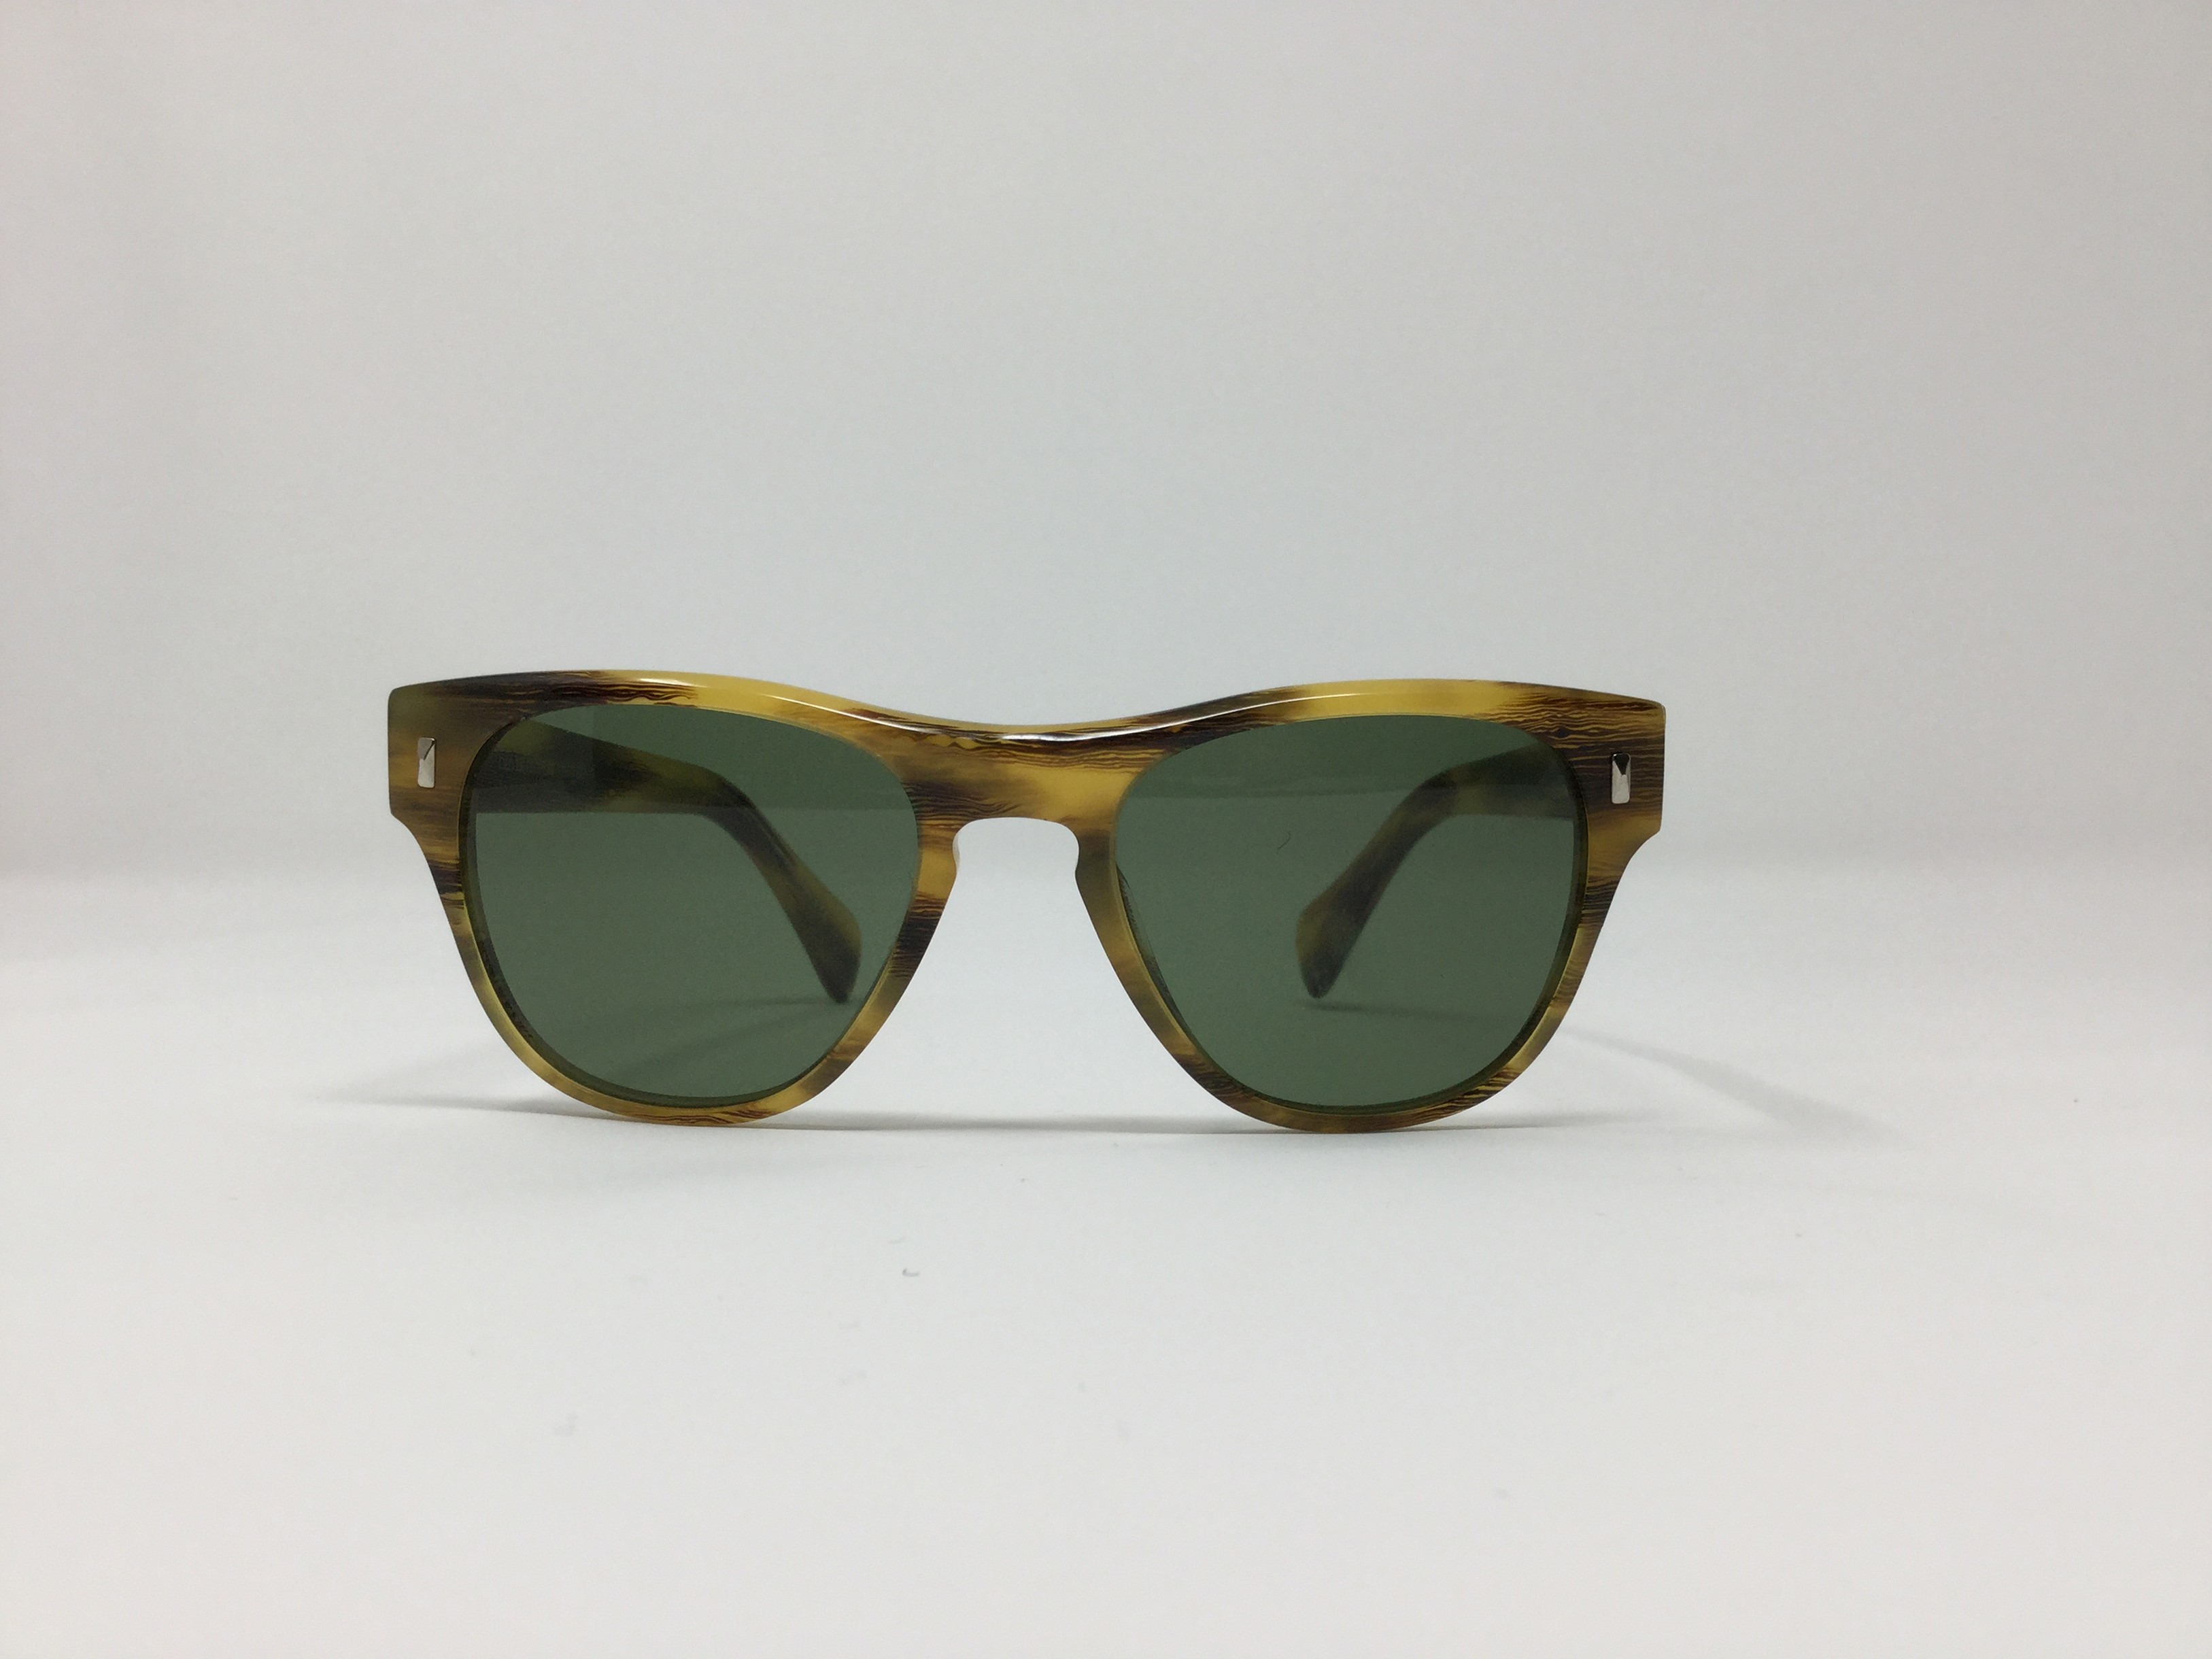 Oliver Peoples OV 5190-S Shean Womens Sunglasses